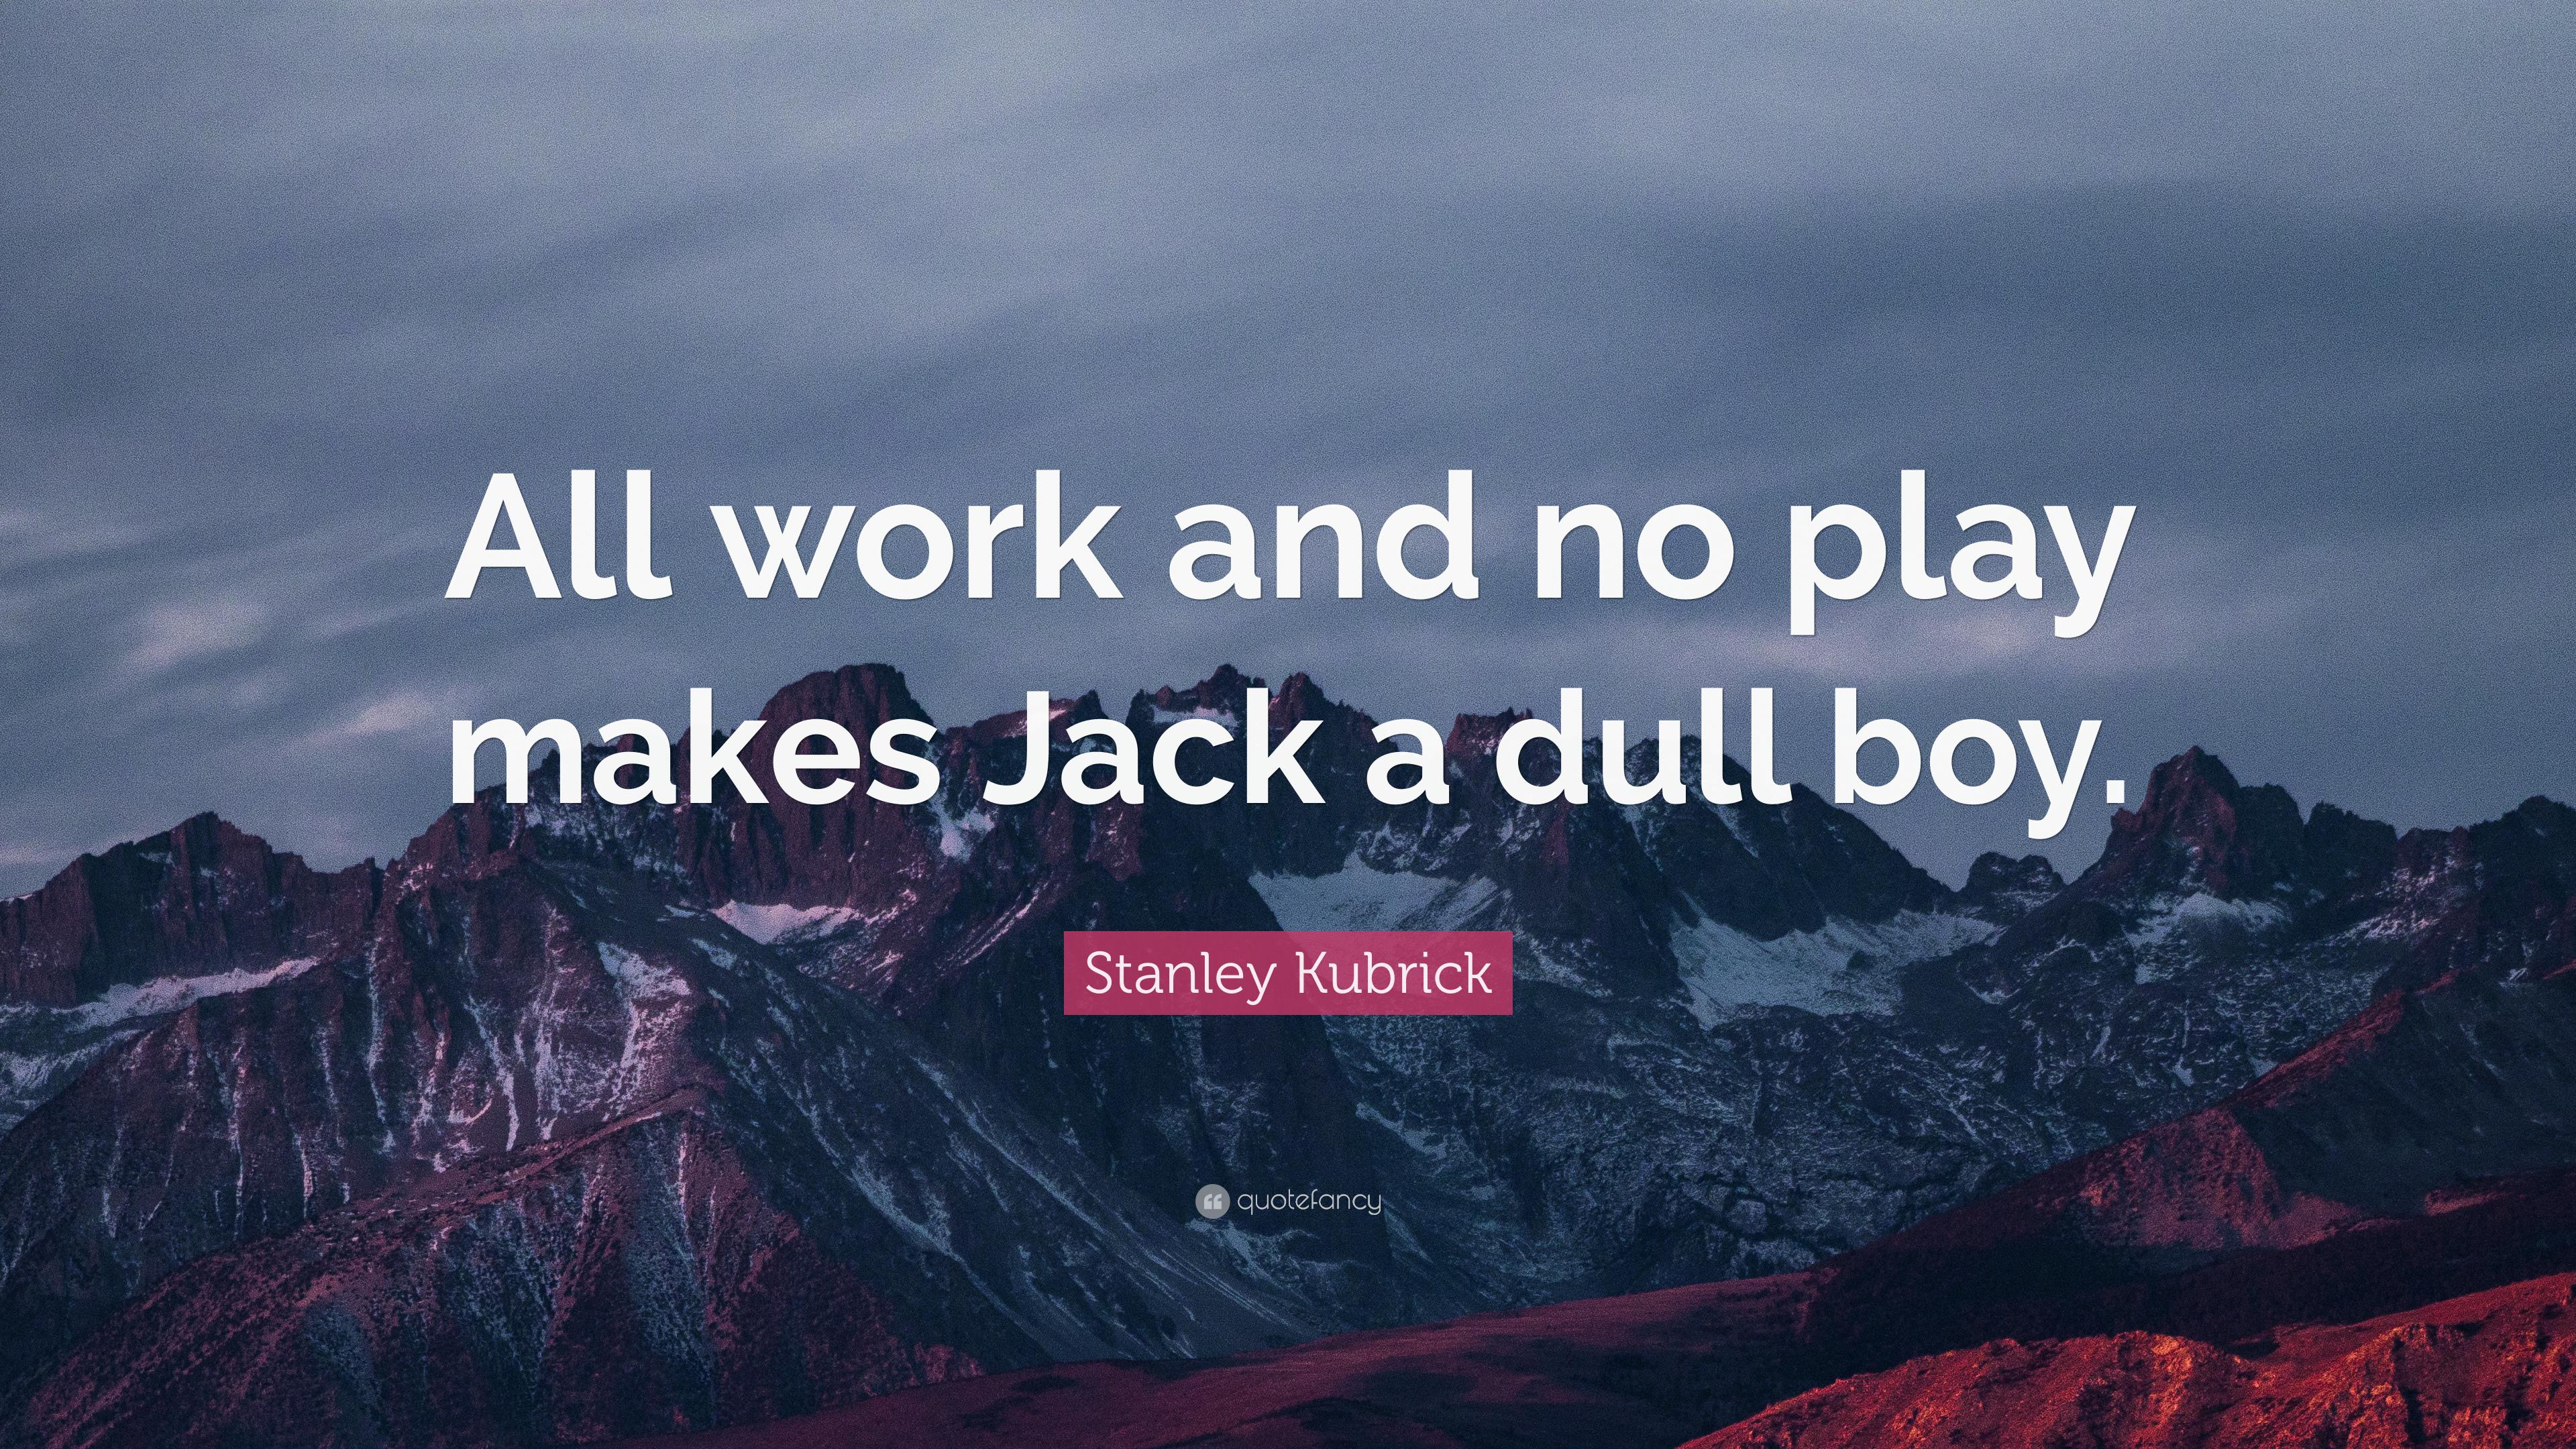 Stanley Kubrick Quote: “All work and no play makes Jack a dull boy